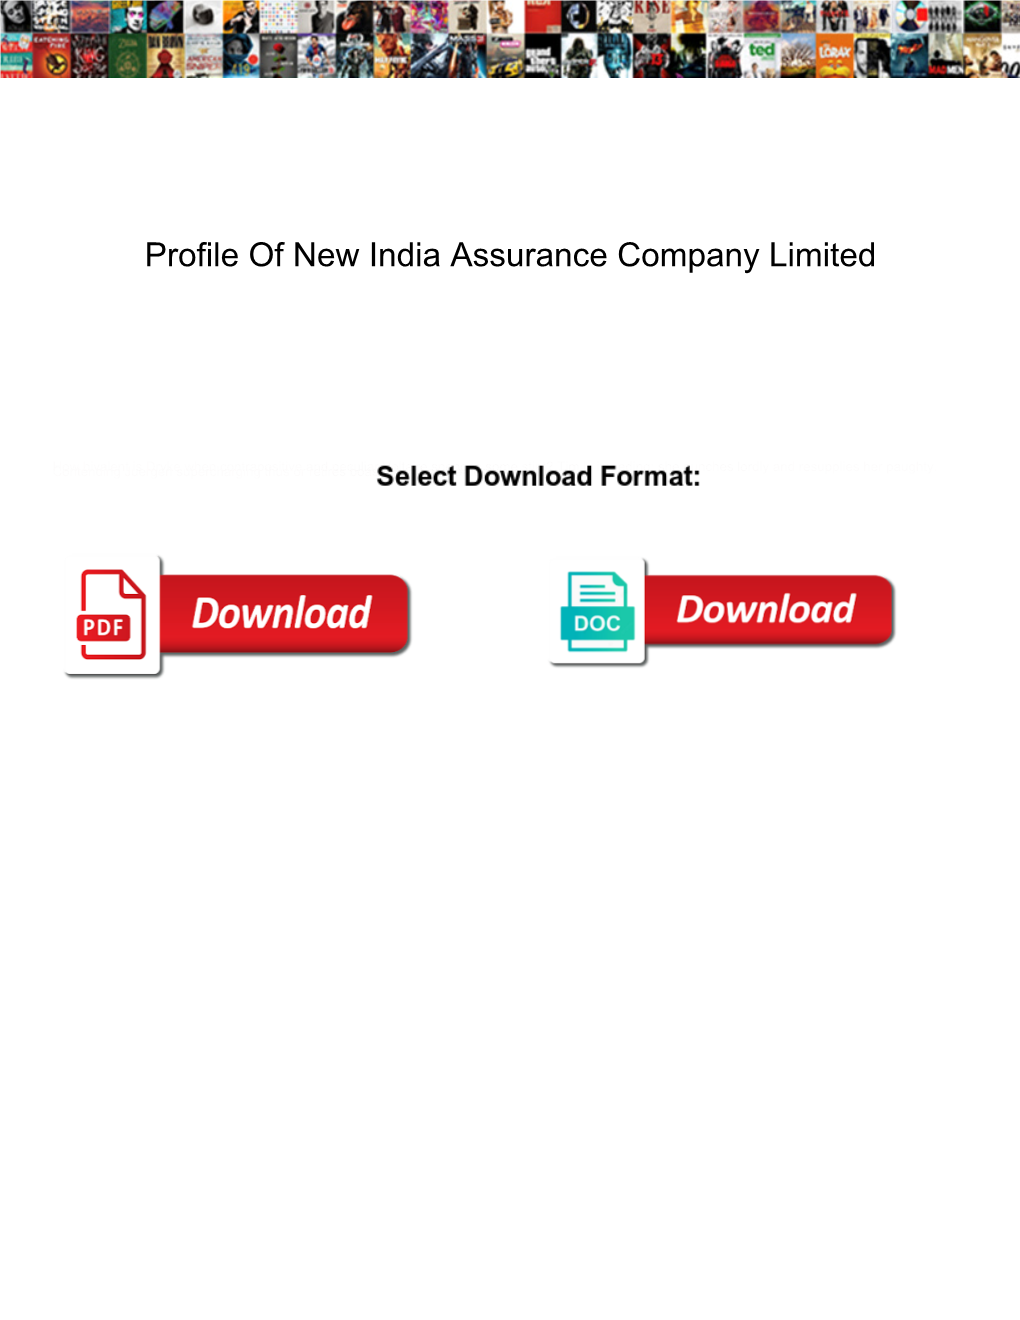 Profile of New India Assurance Company Limited